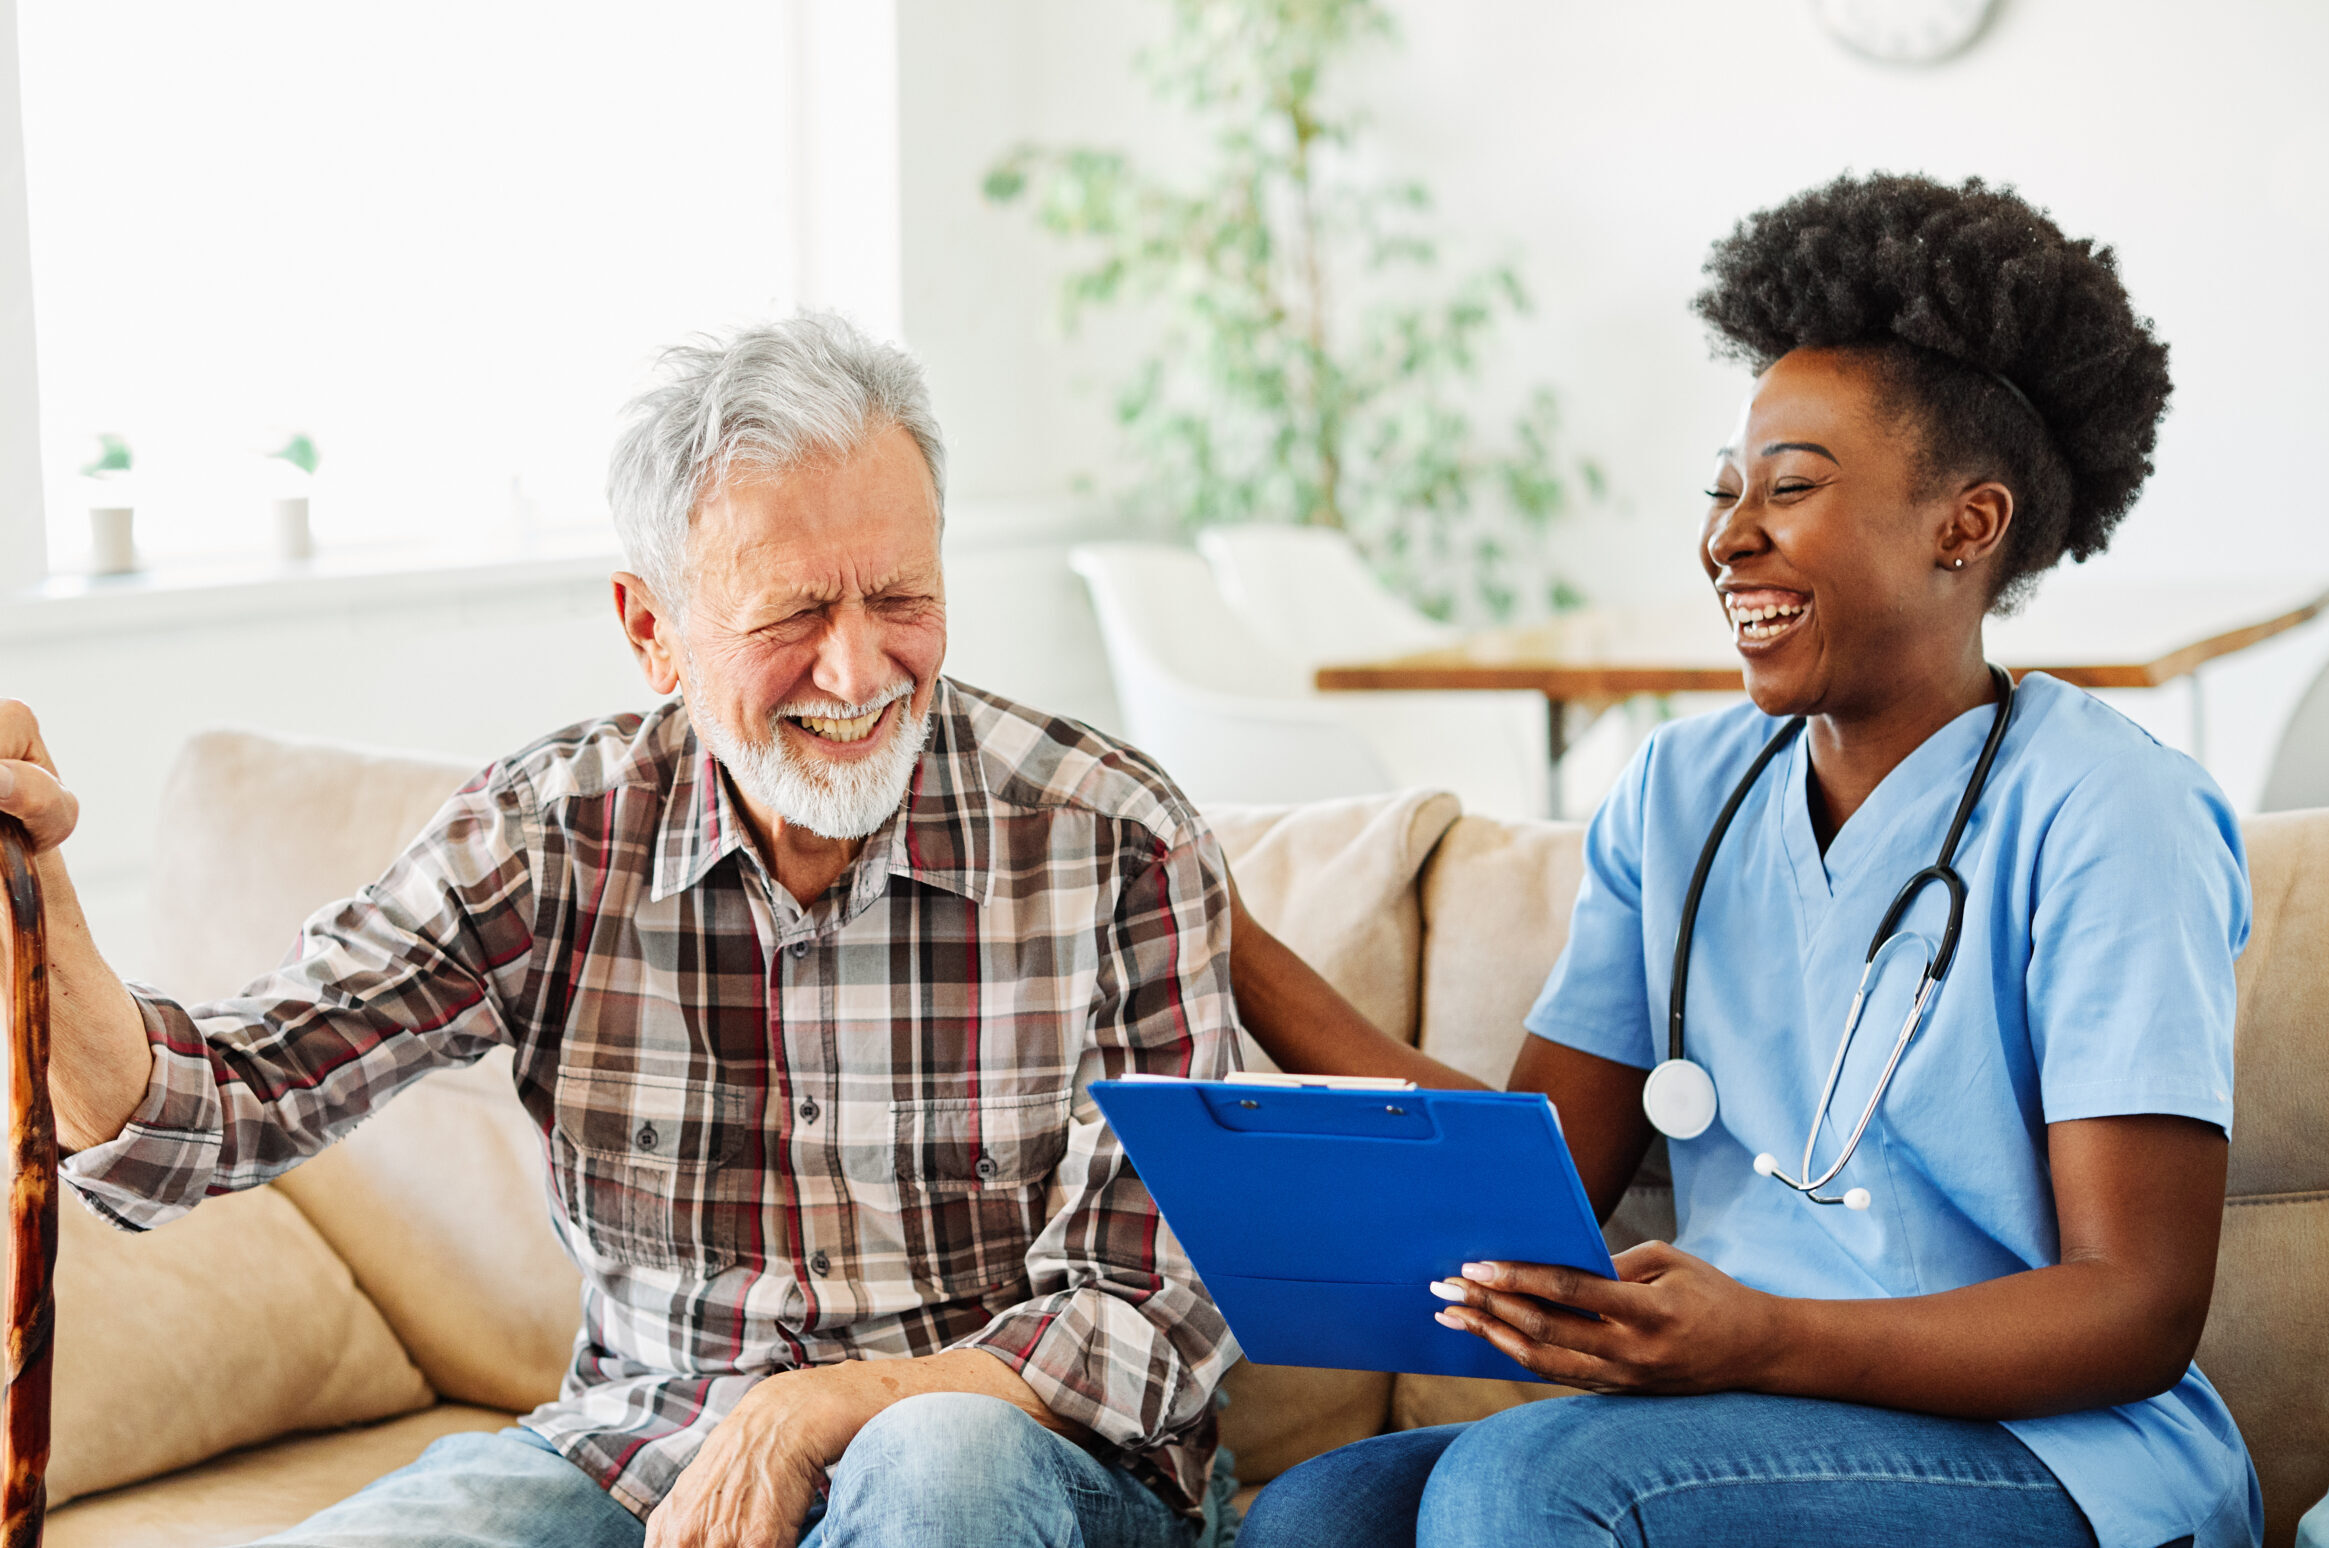 Independent Ownership or a Home Health Care Franchise? What Are Some Important Differences?